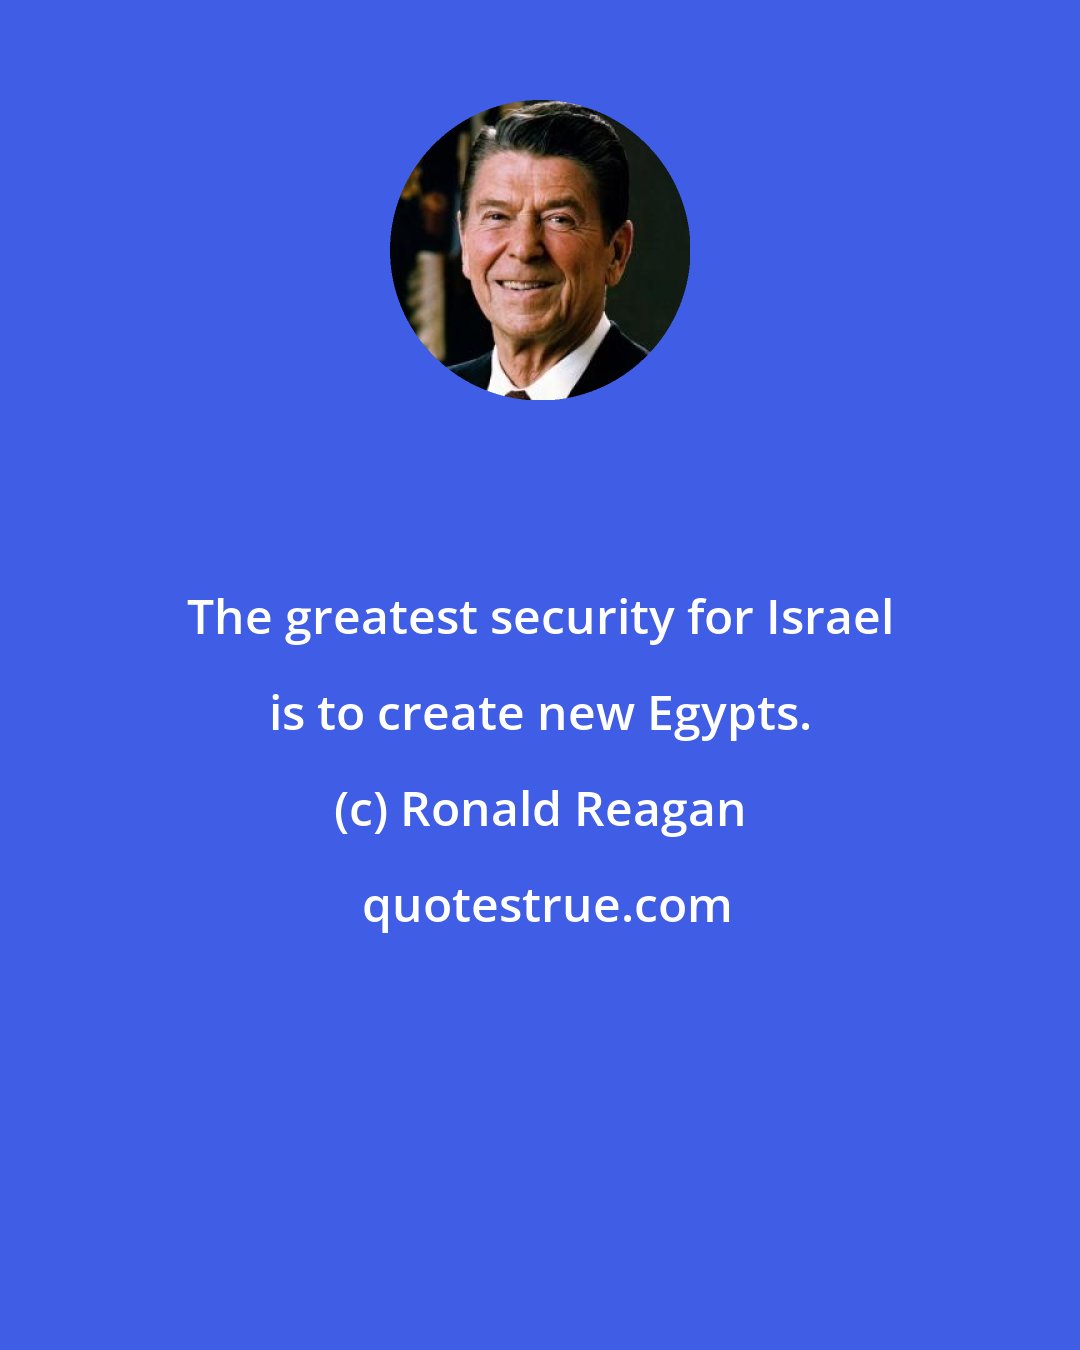 Ronald Reagan: The greatest security for Israel is to create new Egypts.